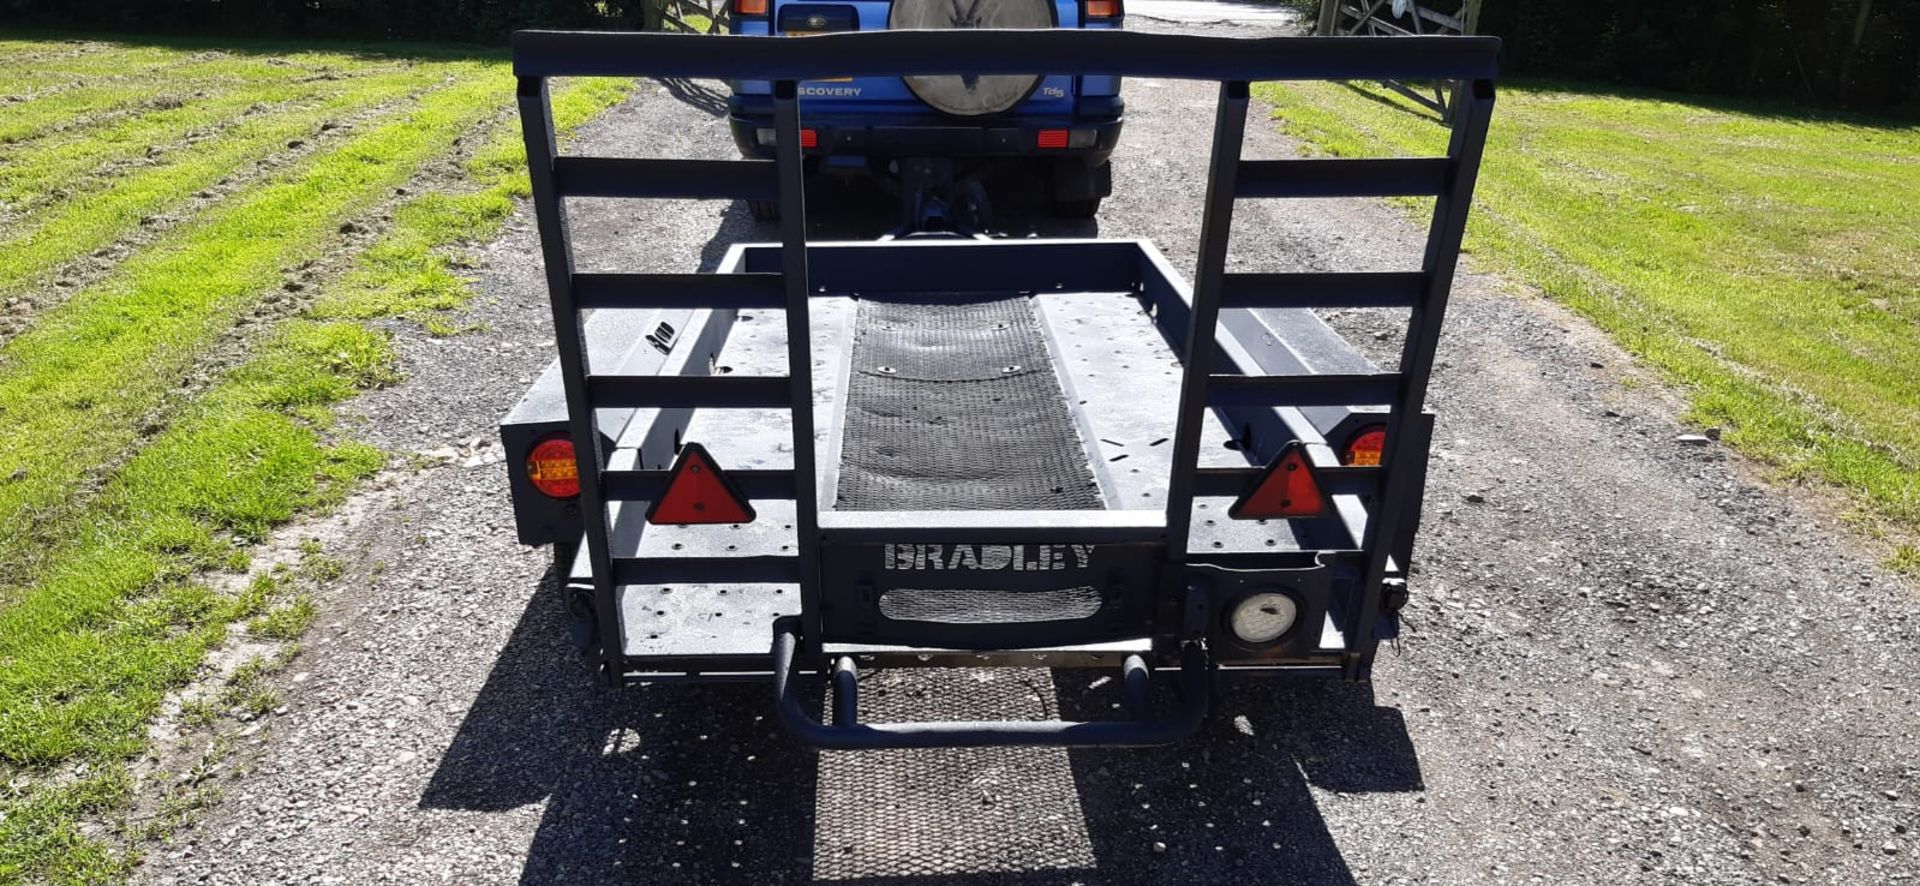 BRADLEY TWIN AXLE TOW-ABLE PLANT TRAILER WITH RAMP, MODEL S2600PT, YEAR 2010, 2600 KG GROSS *NO VAT* - Image 4 of 12